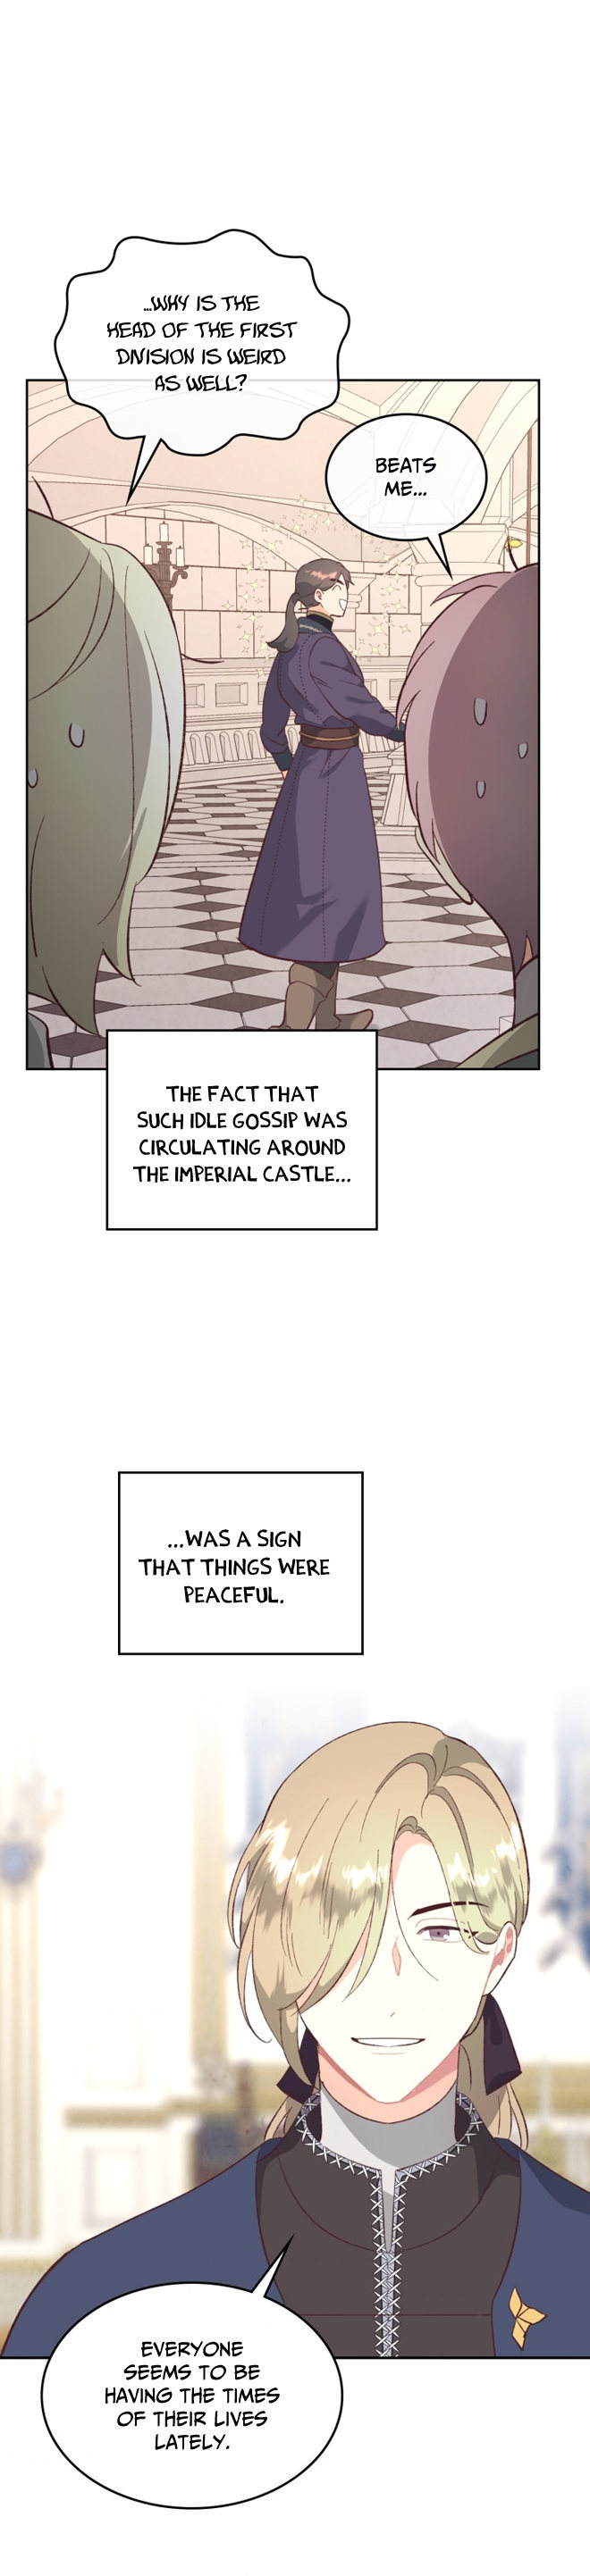 Emperor And The Female Knight - Chapter 130 Page 5